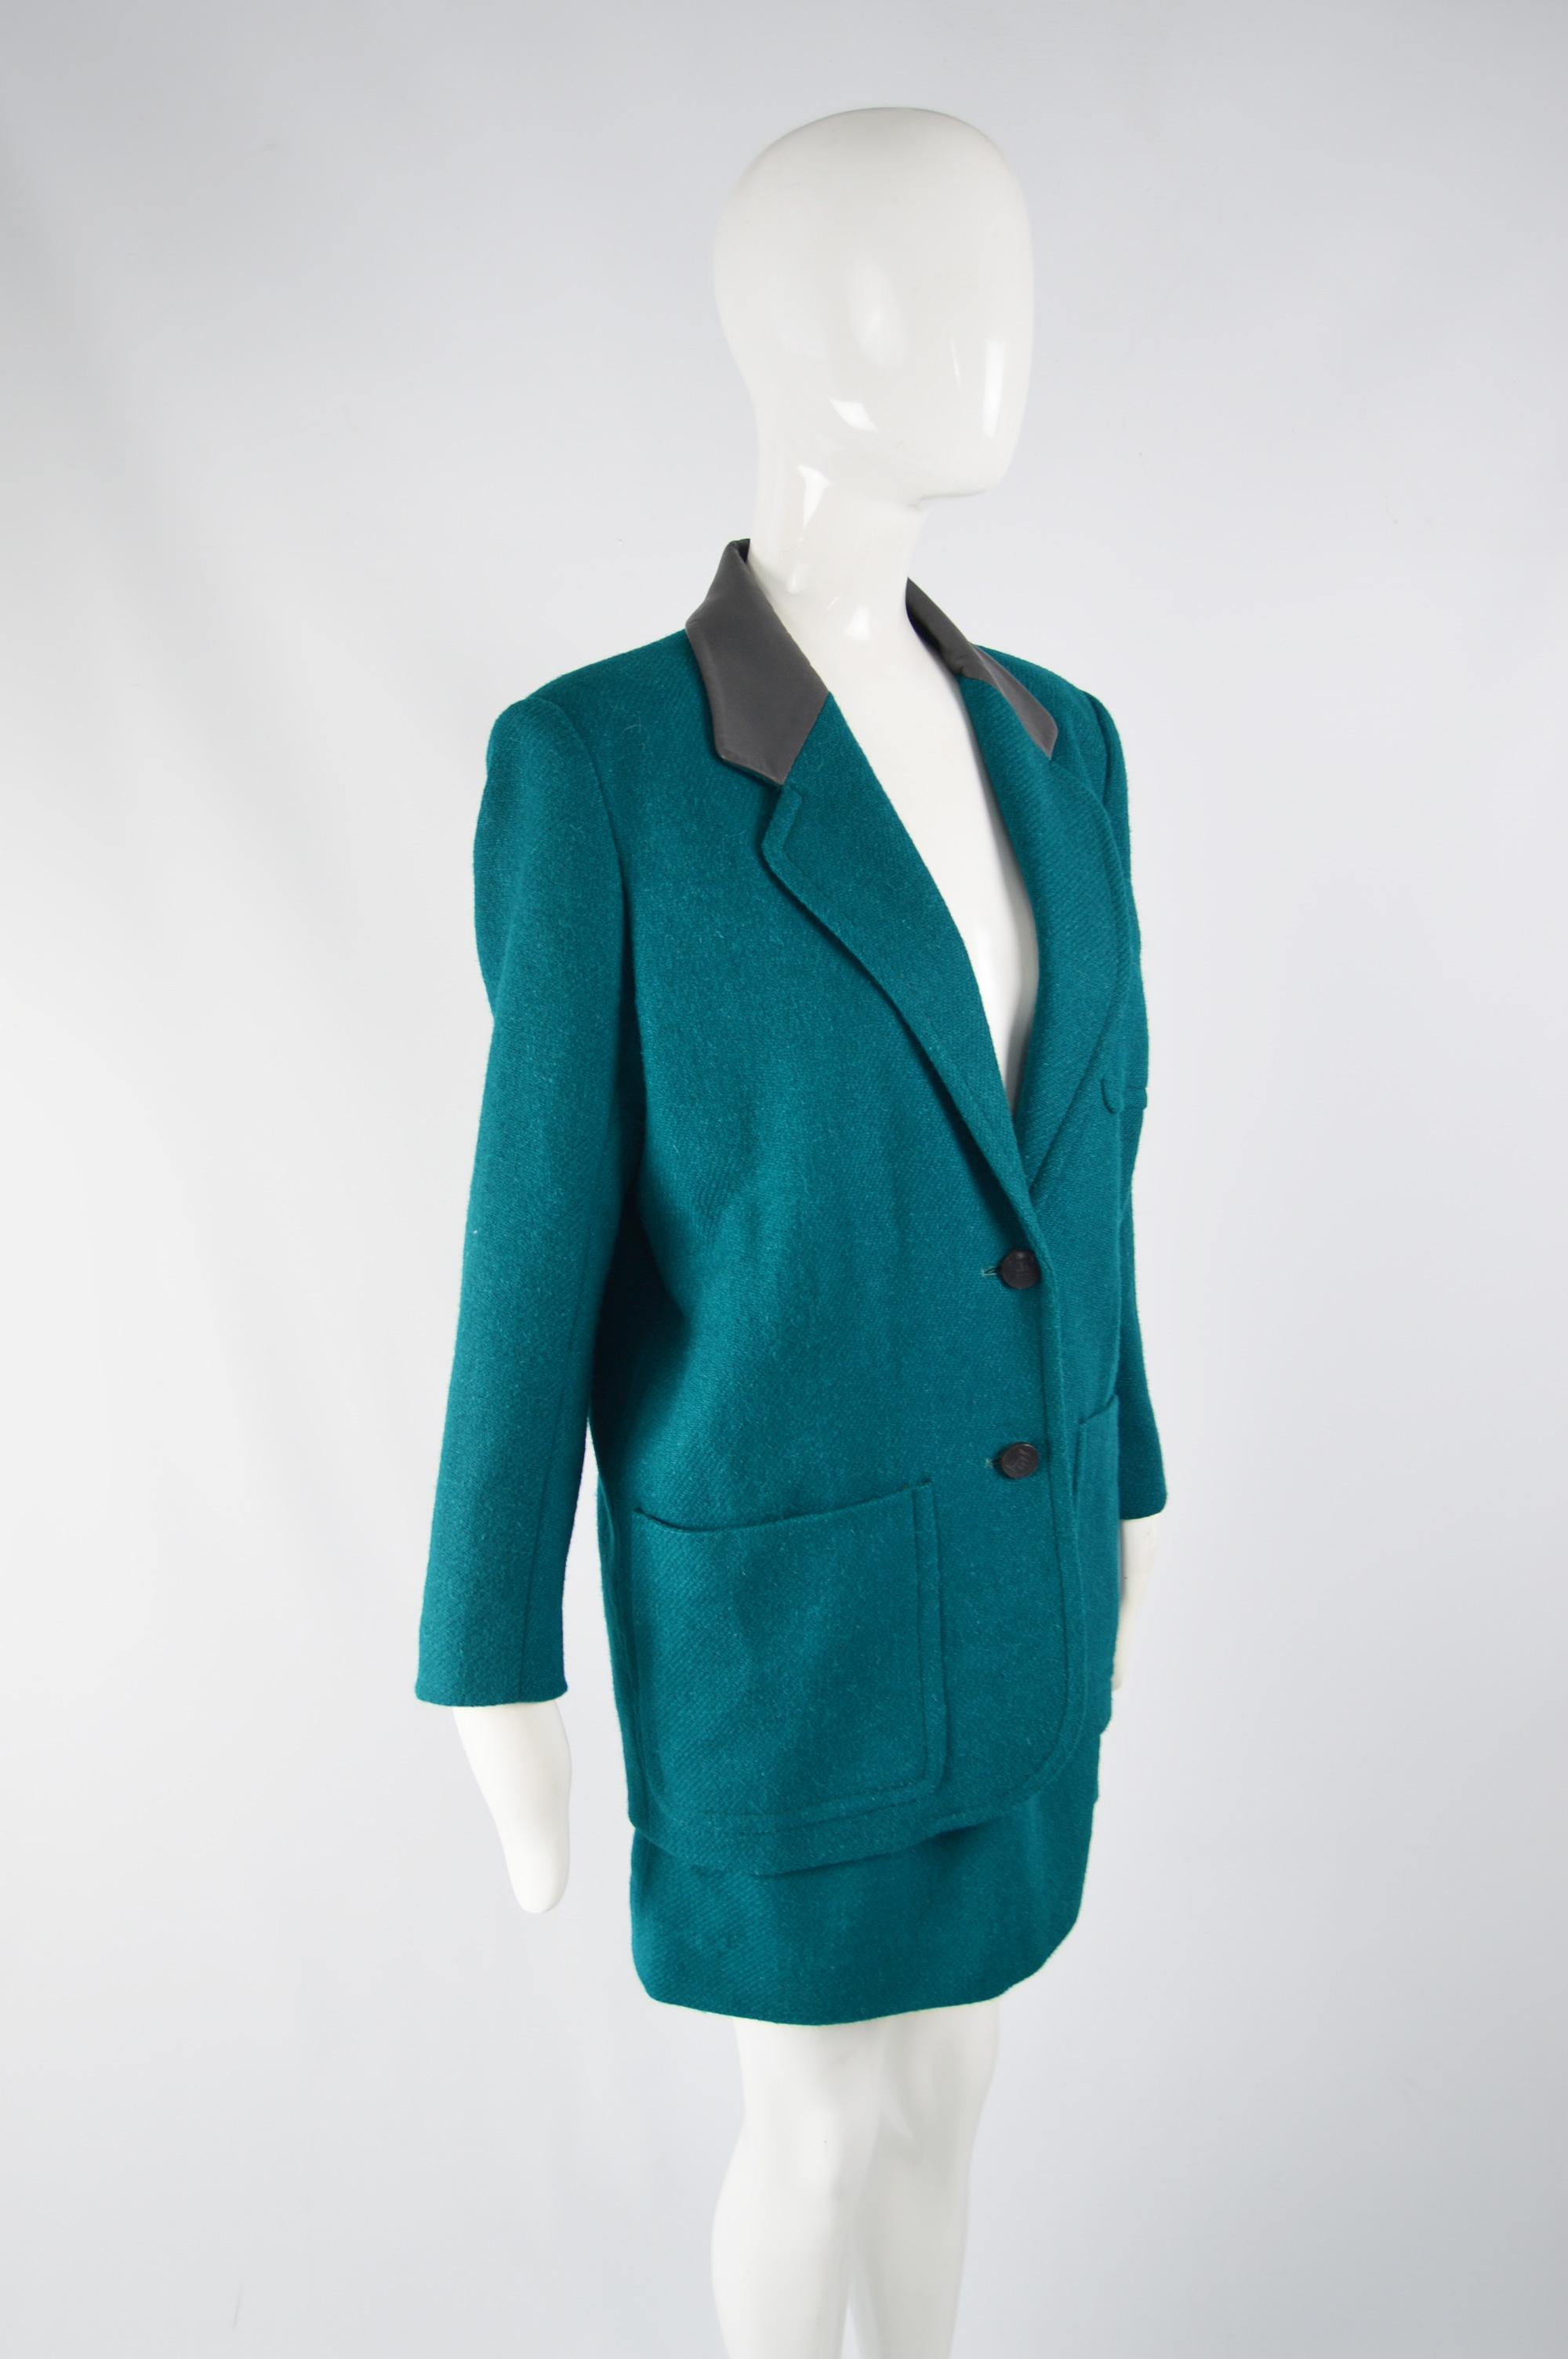 Pierre Balmain 1980s Vintage Wool Blazer Jacket & Mini Skirt Suit In Excellent Condition For Sale In Doncaster, South Yorkshire